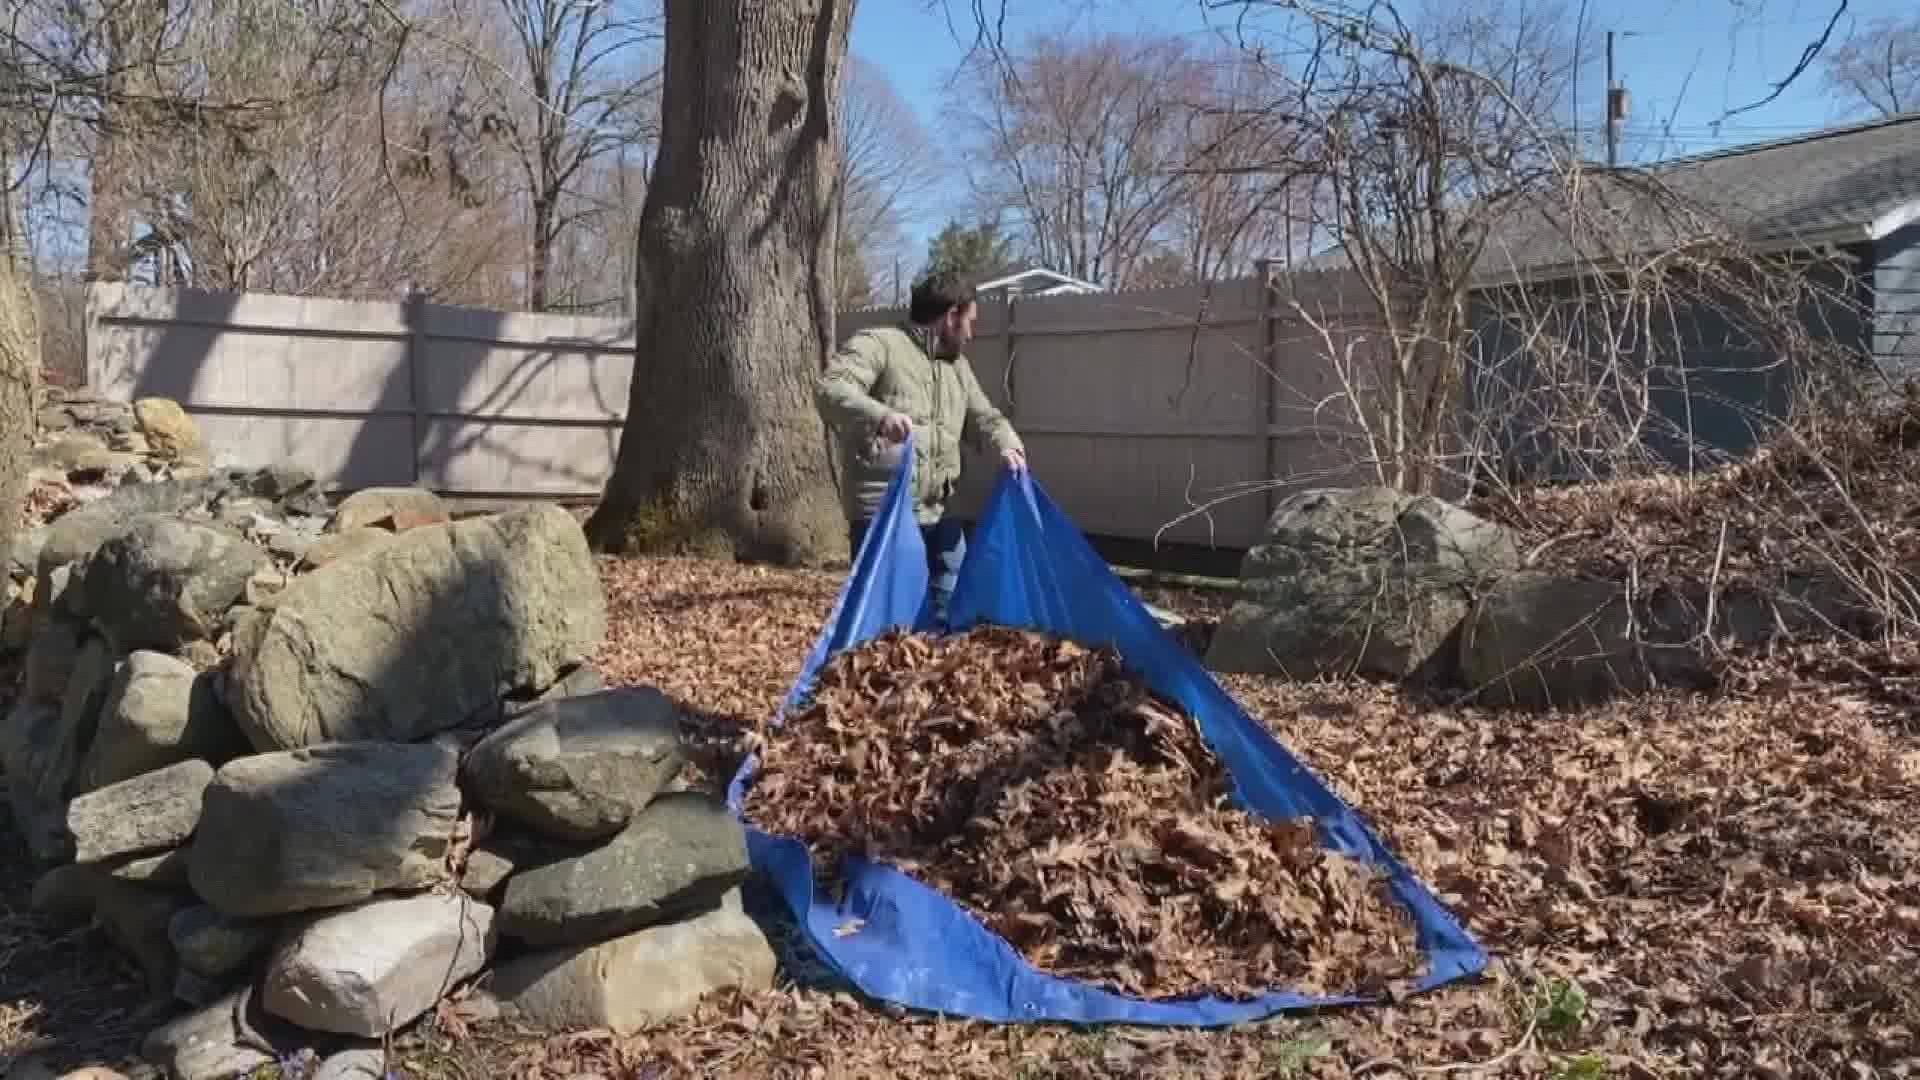 Consumer Reports says blowing the leaves is easiest and quickest. If you need to rake, a tarp will be the key.